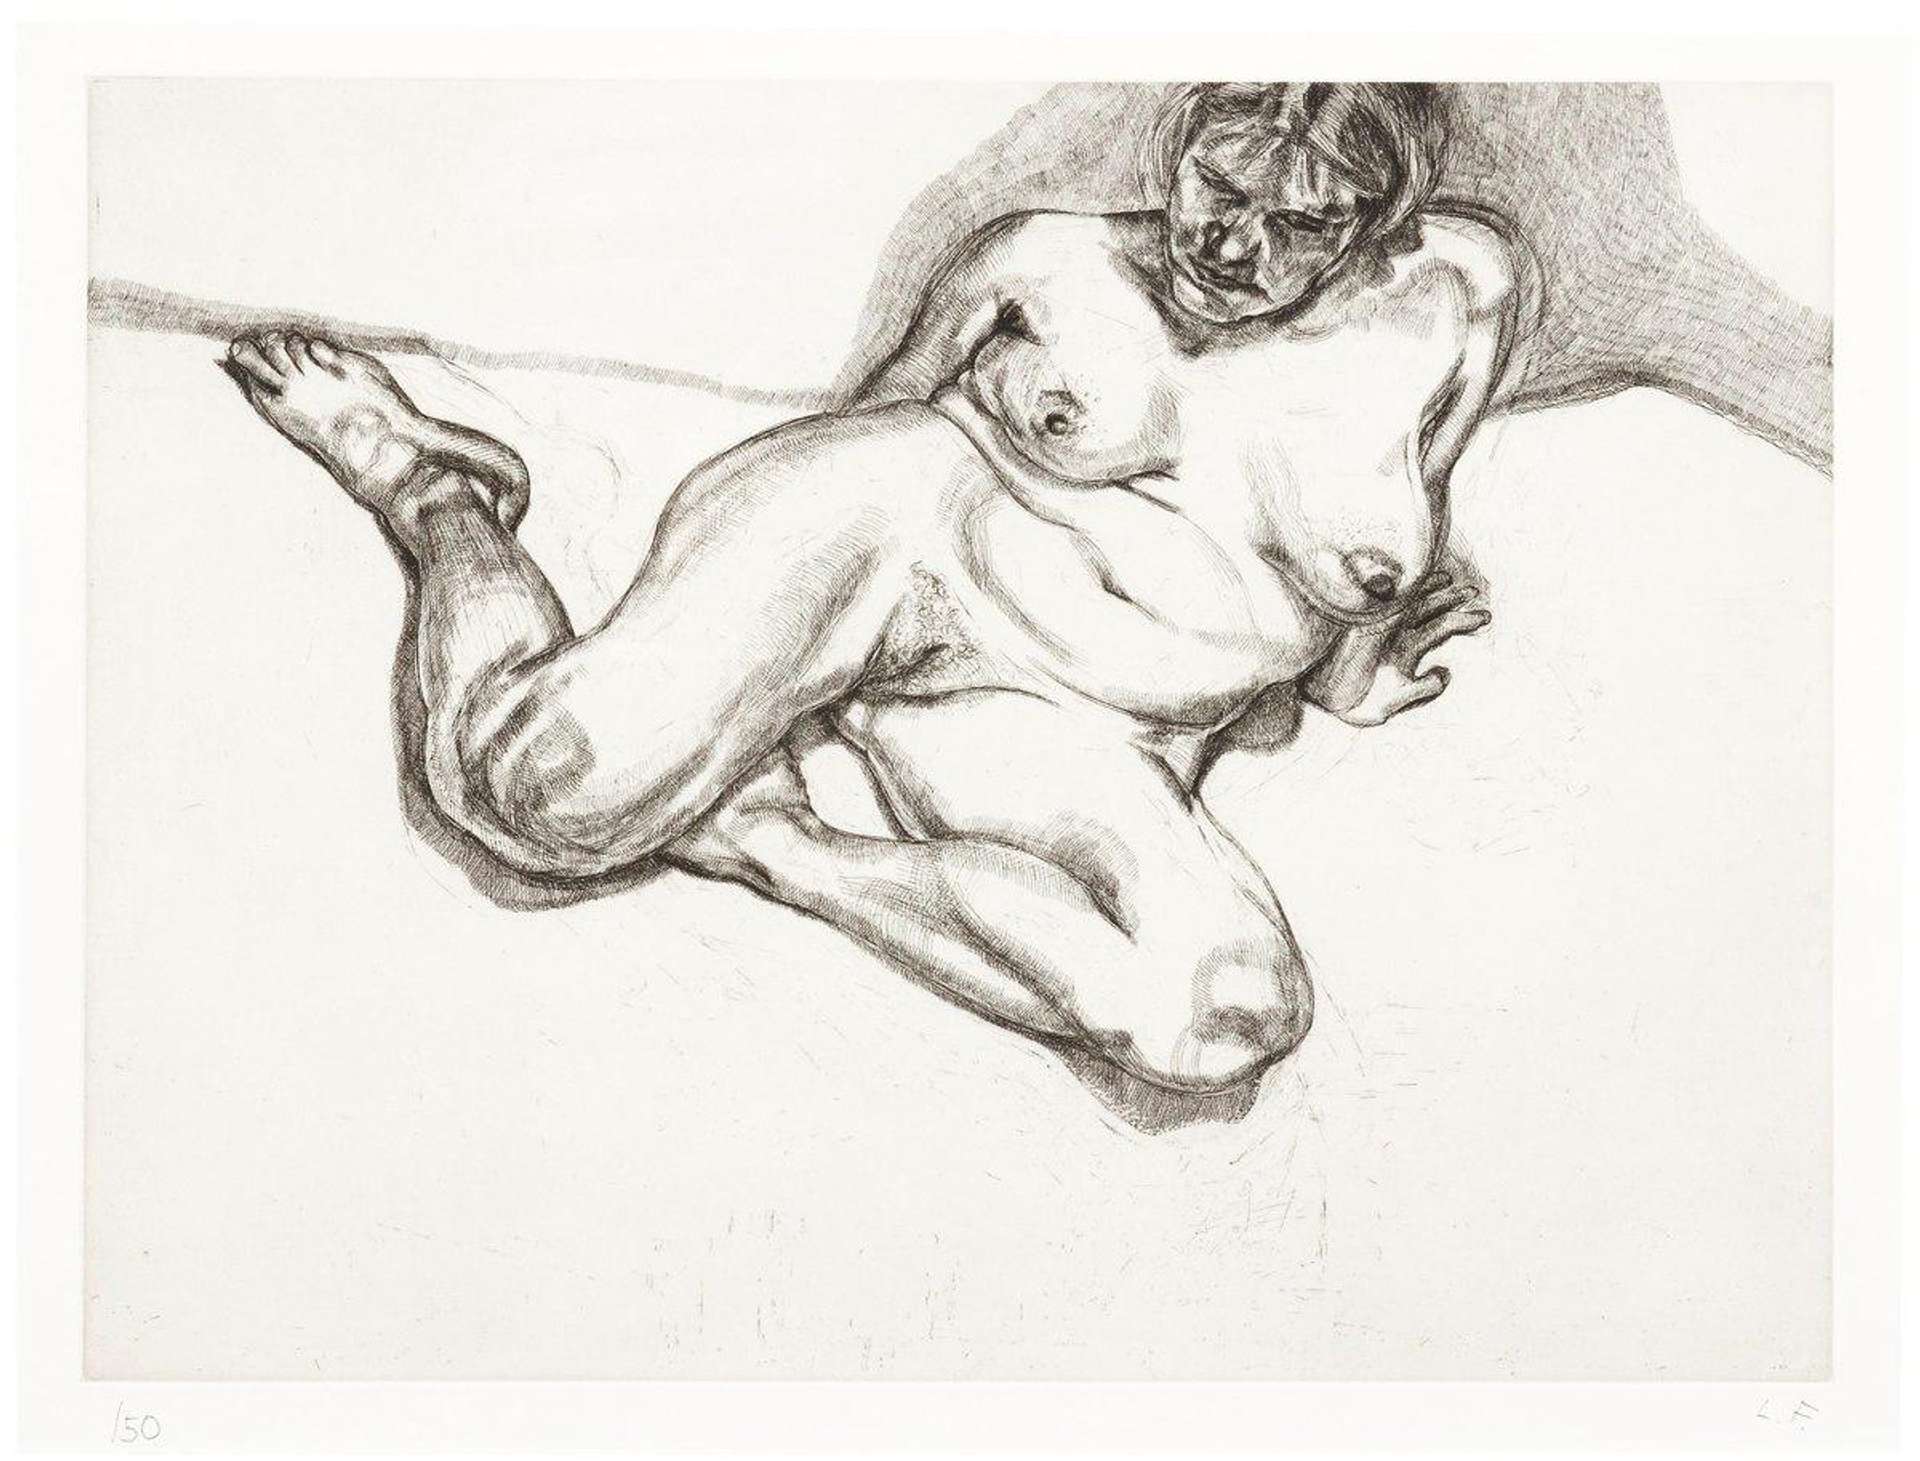 Lucian Freud's Girl Sitting. A drawing of a nude woman who is half propped up against the wall. 